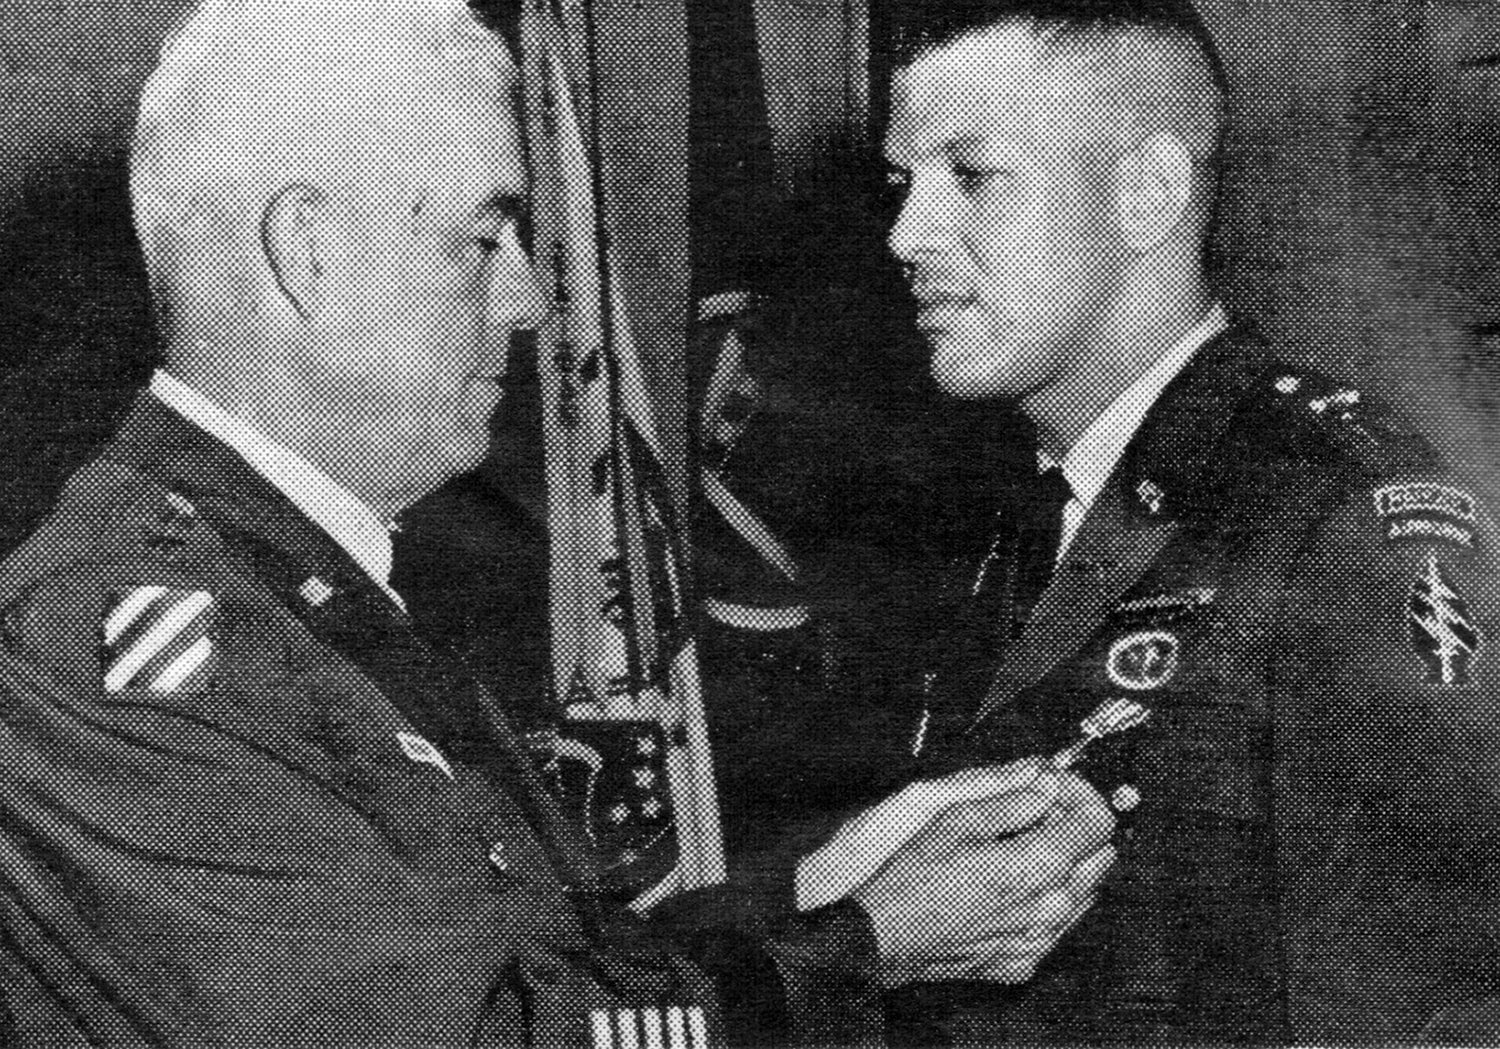 In December 1965, then-Capt. Davis, right, is awarded the Silver Star. (Credit: U.S. Army)